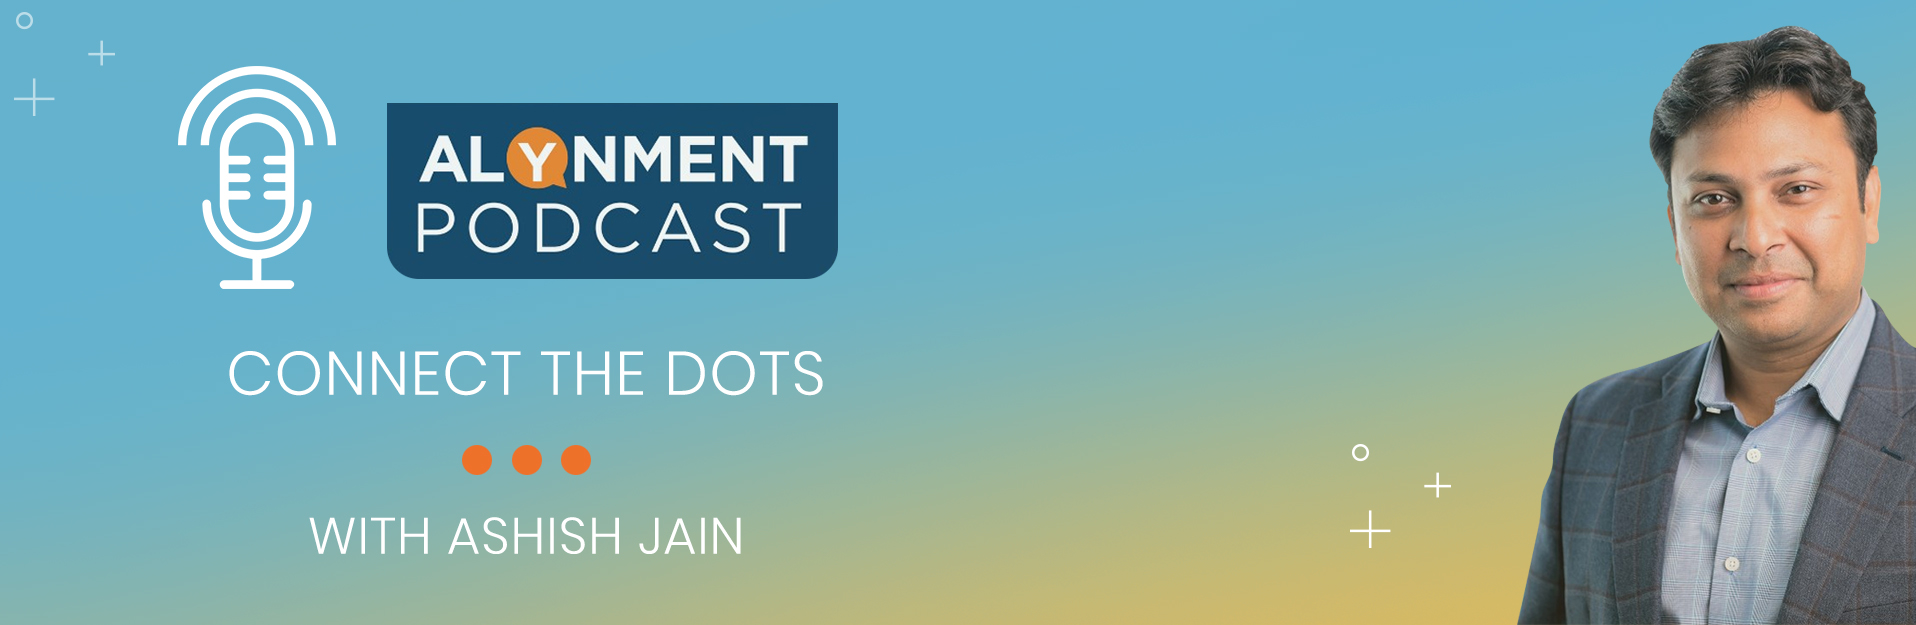 ALYNMENT Podcast | Detail Page | Podcast